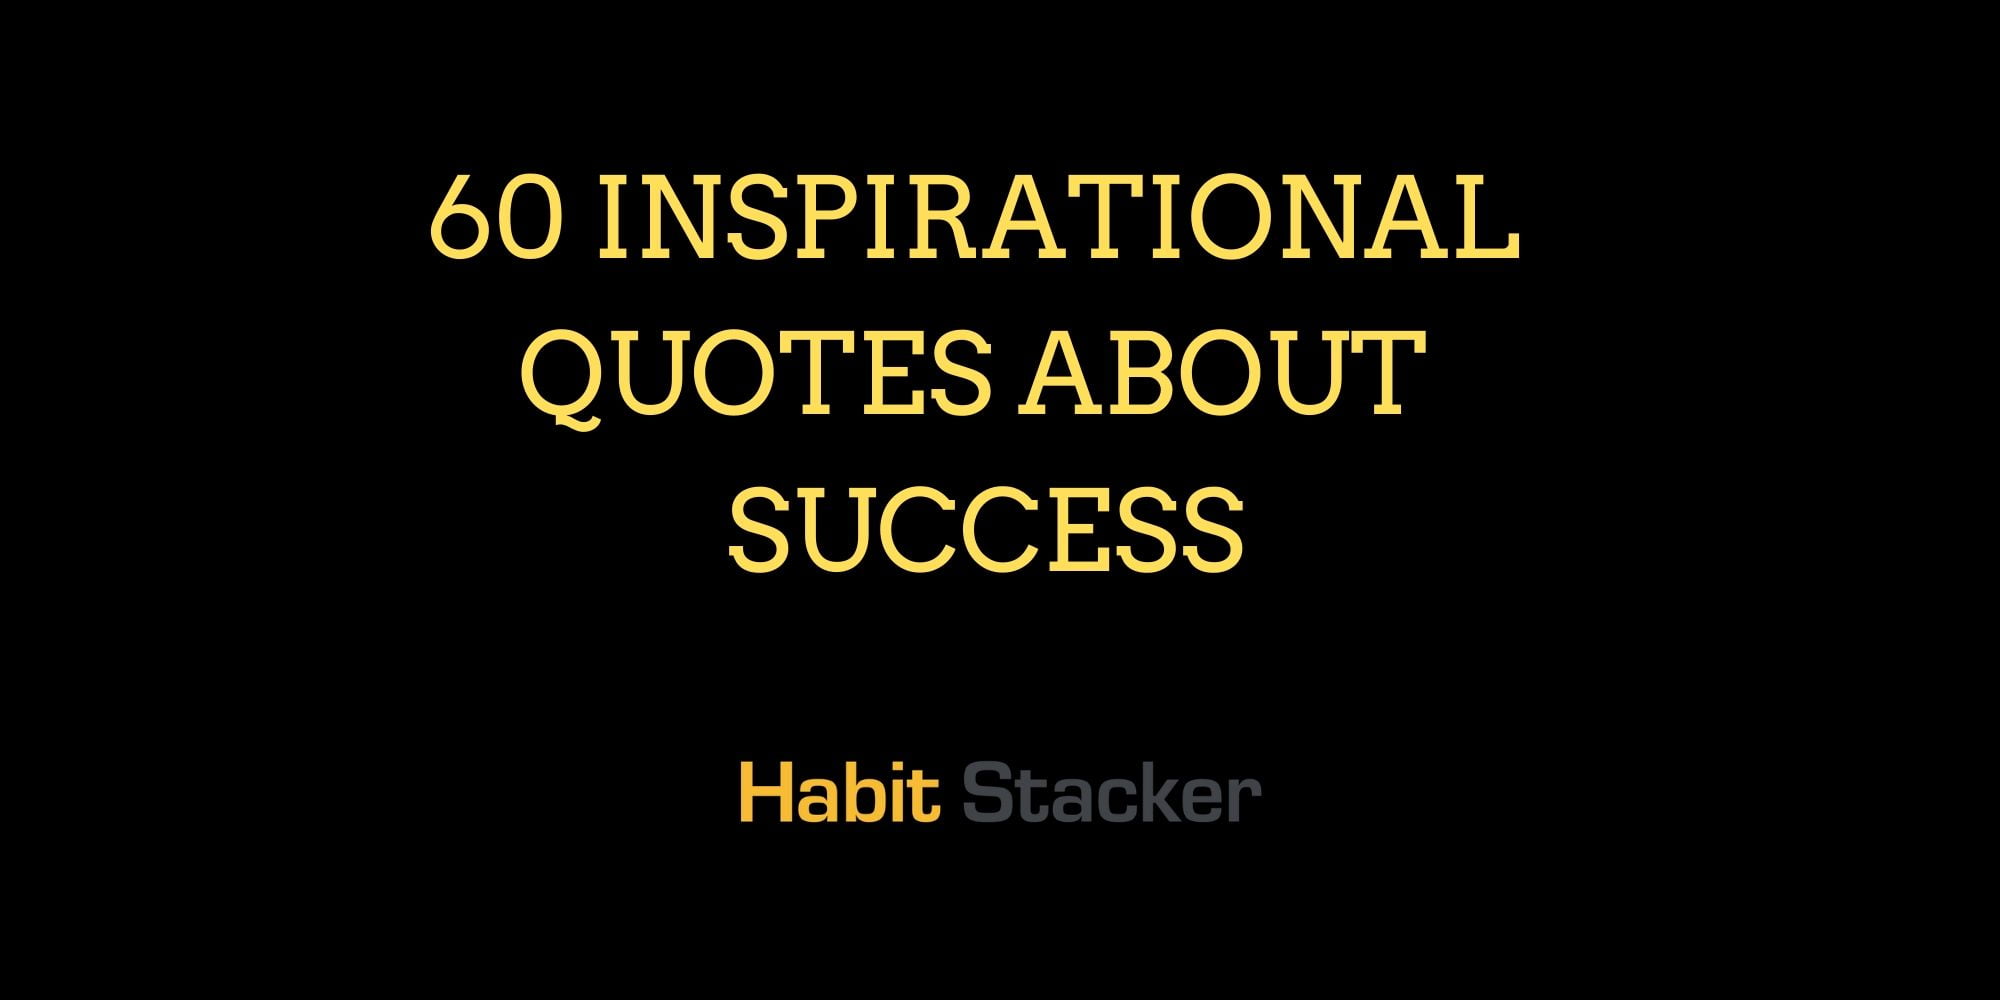 60-inspirational-quotes-about-success-habit-stacker